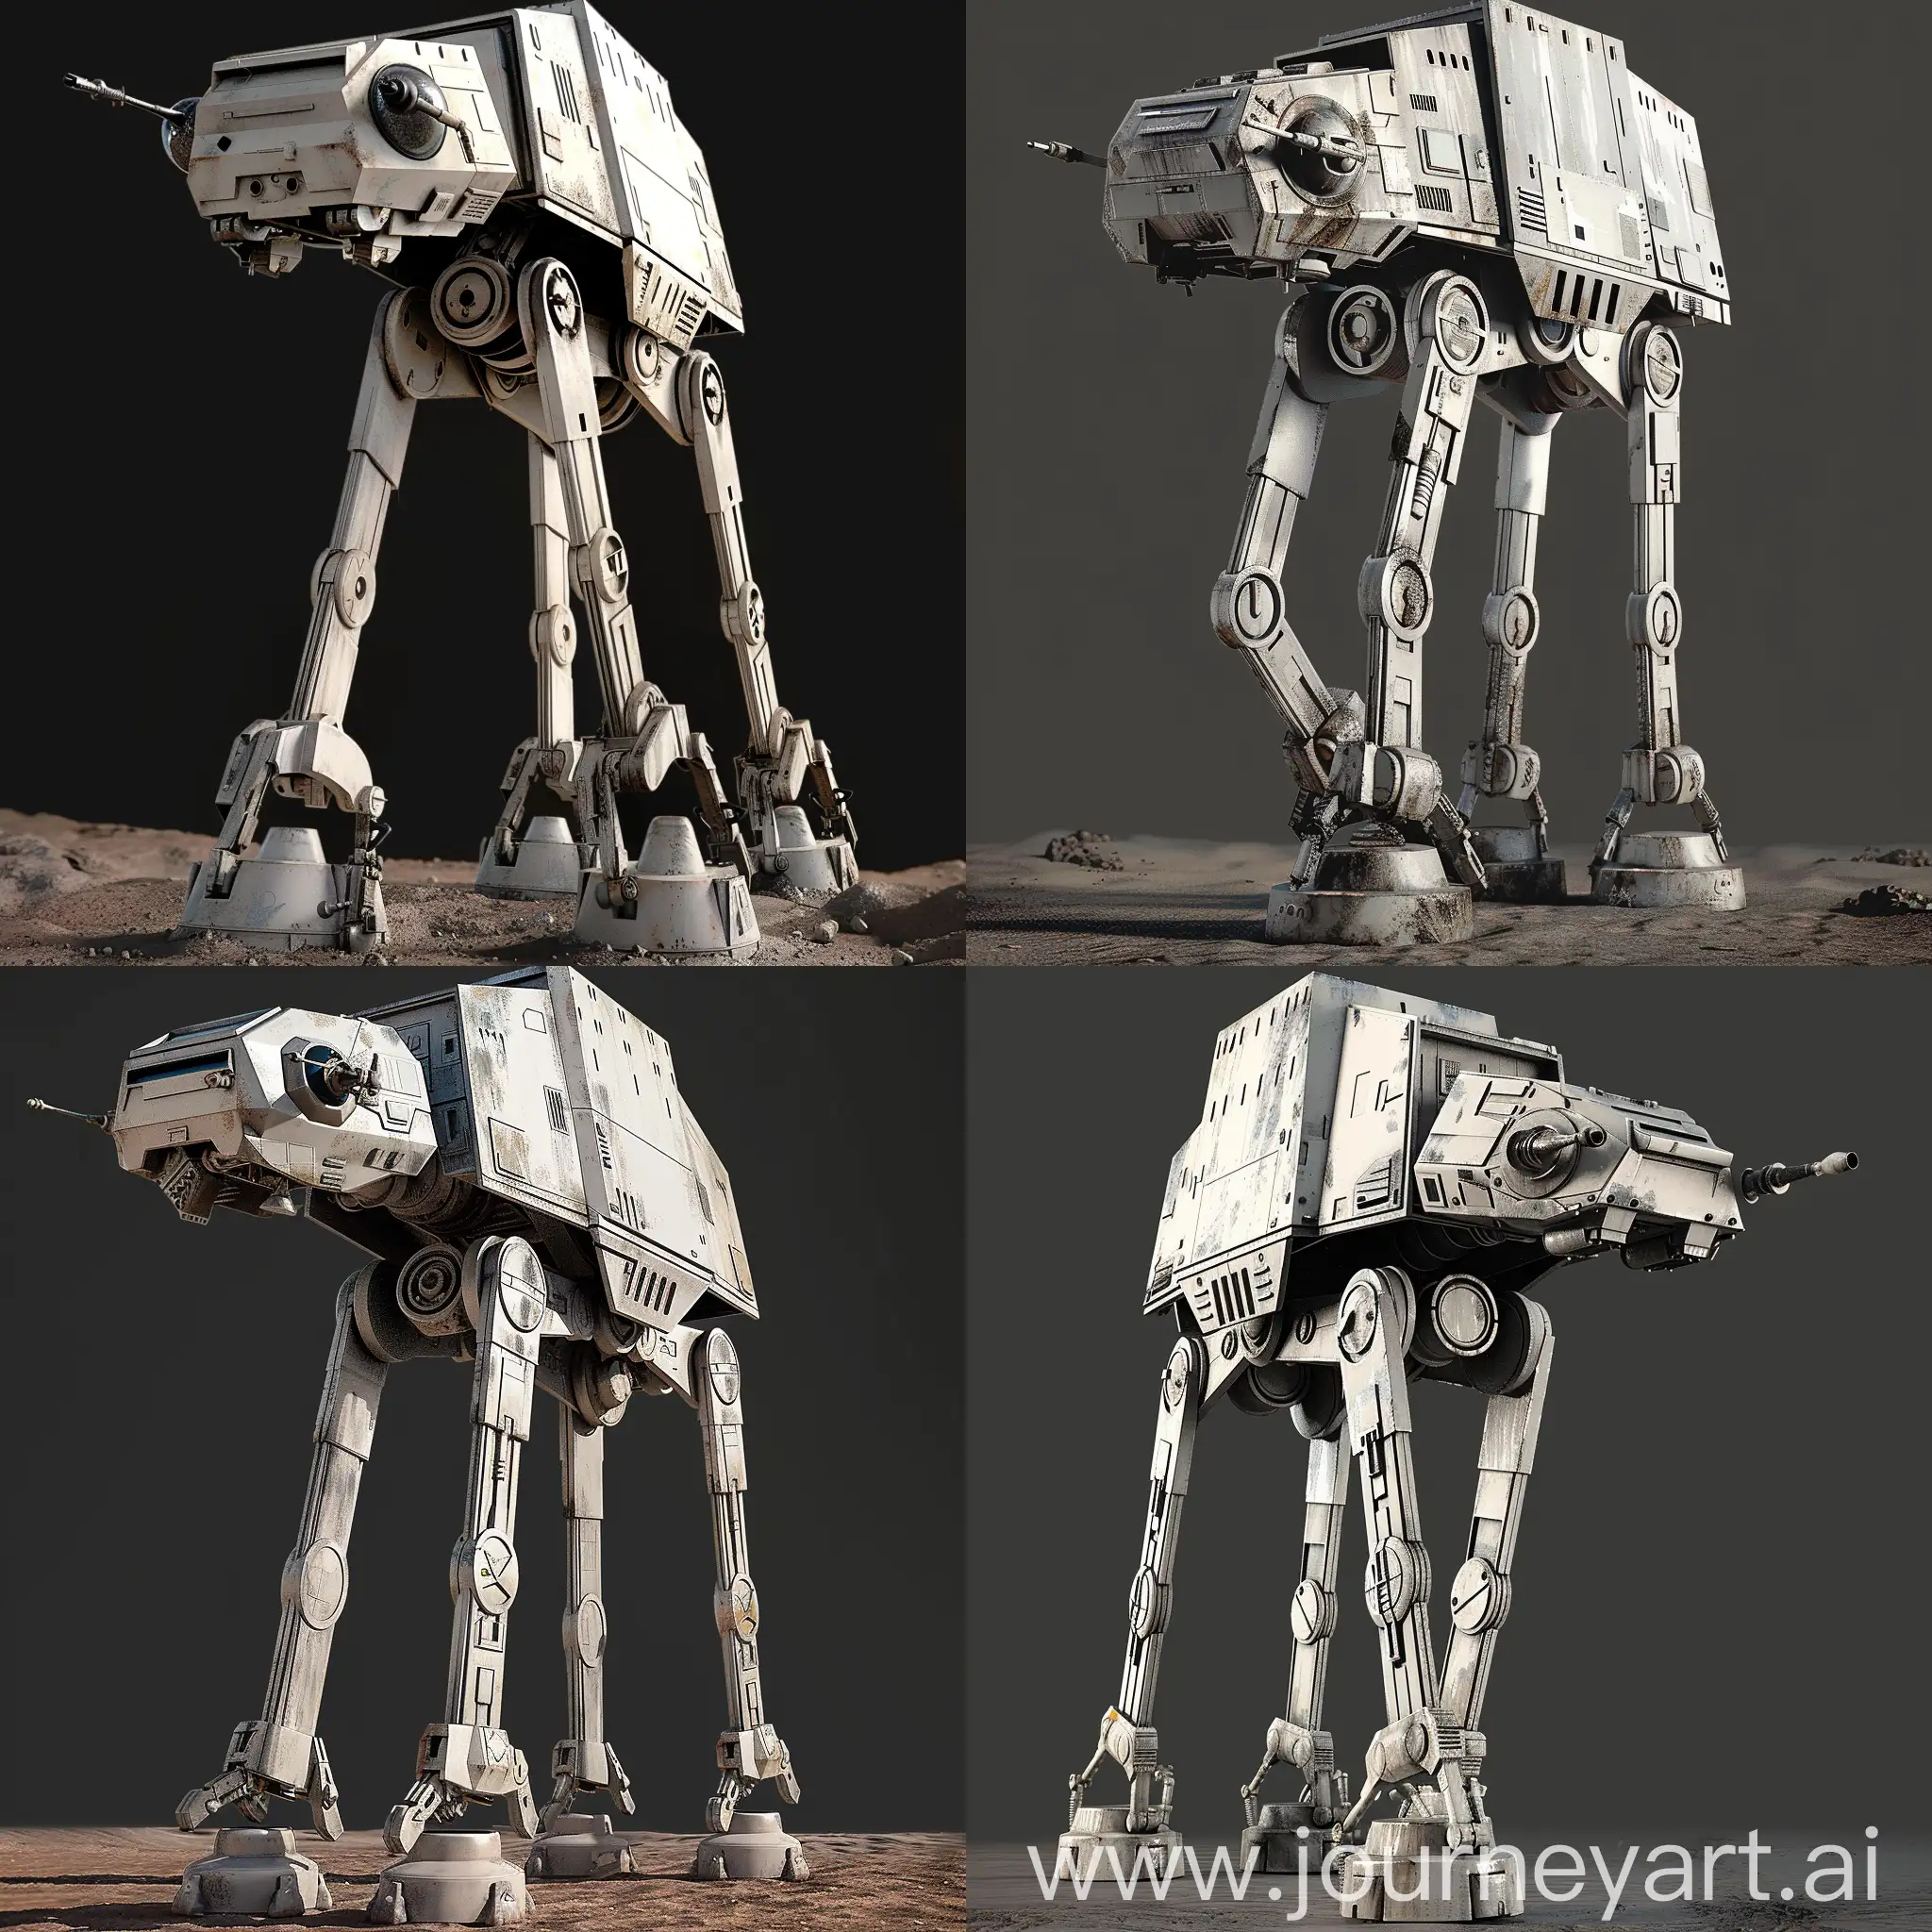 Futuristic Star Wars All Terrain Scout Transport https://static.wikia.nocookie.net/starwars/images/f/ff/ATST-SWBdice.png/revision/latest?cb=20230723050455, AT-ST Mk II (or variant name), Futuristic, Bipedal Walker, Sleek, Advanced Weaponry, Armored Reconnaissance Vehicle, Sci-Fi Military, Detailed Cockpit, Dynamic Pose, Planetary Landscape, Galactic Empire (if it remains affiliated), Rugged Terrain (for the environment), Battle-worn (for a war-torn look) octane render--stylize 1000